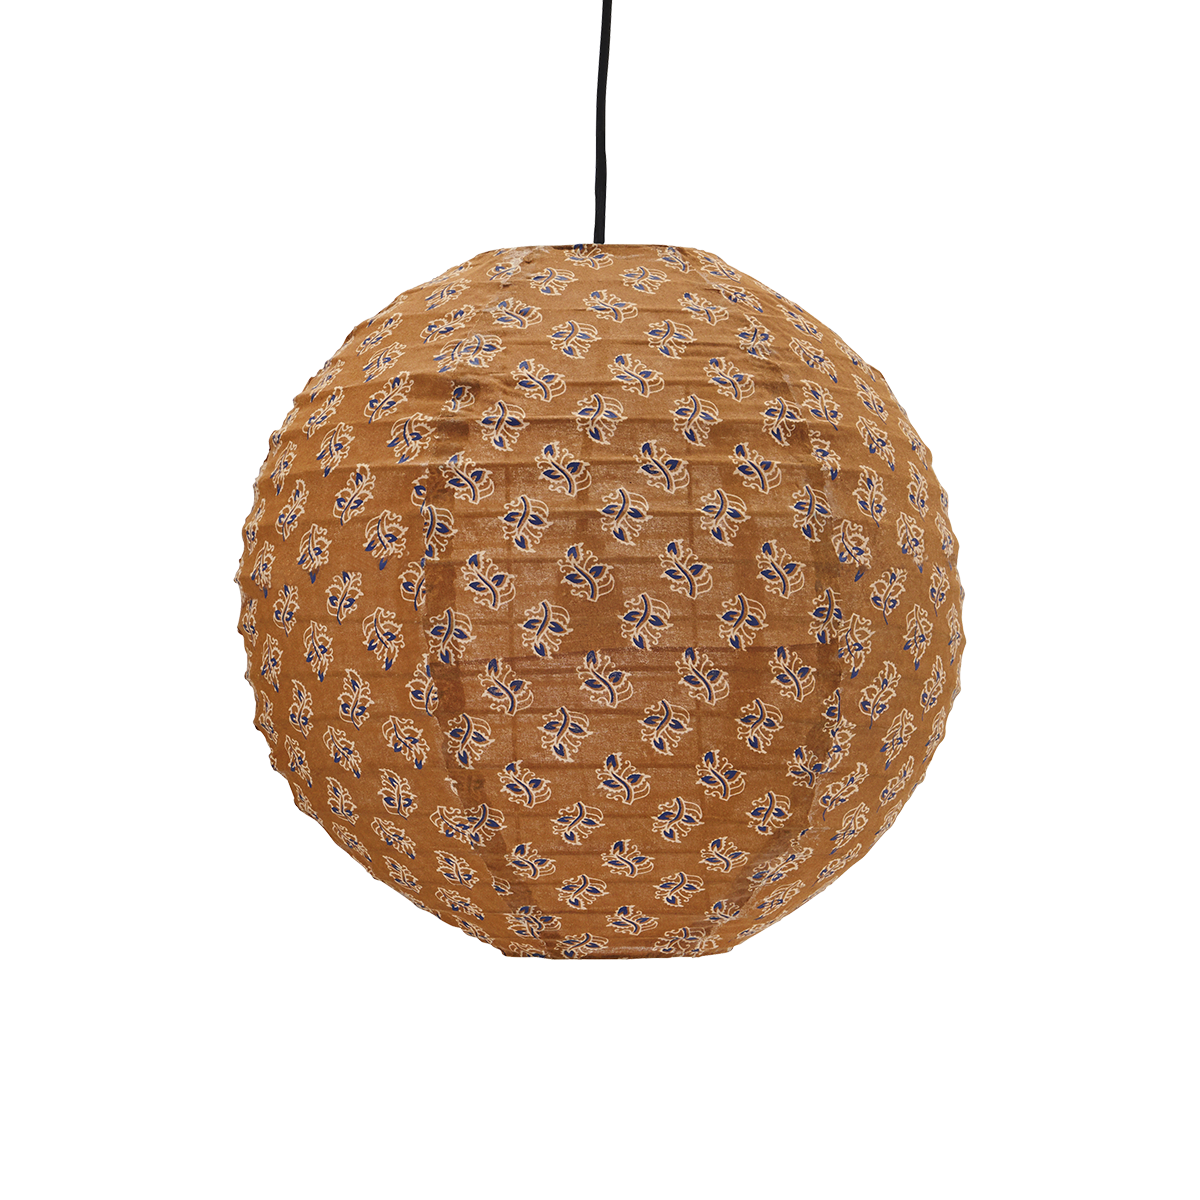 Printed cotton ceiling lamp